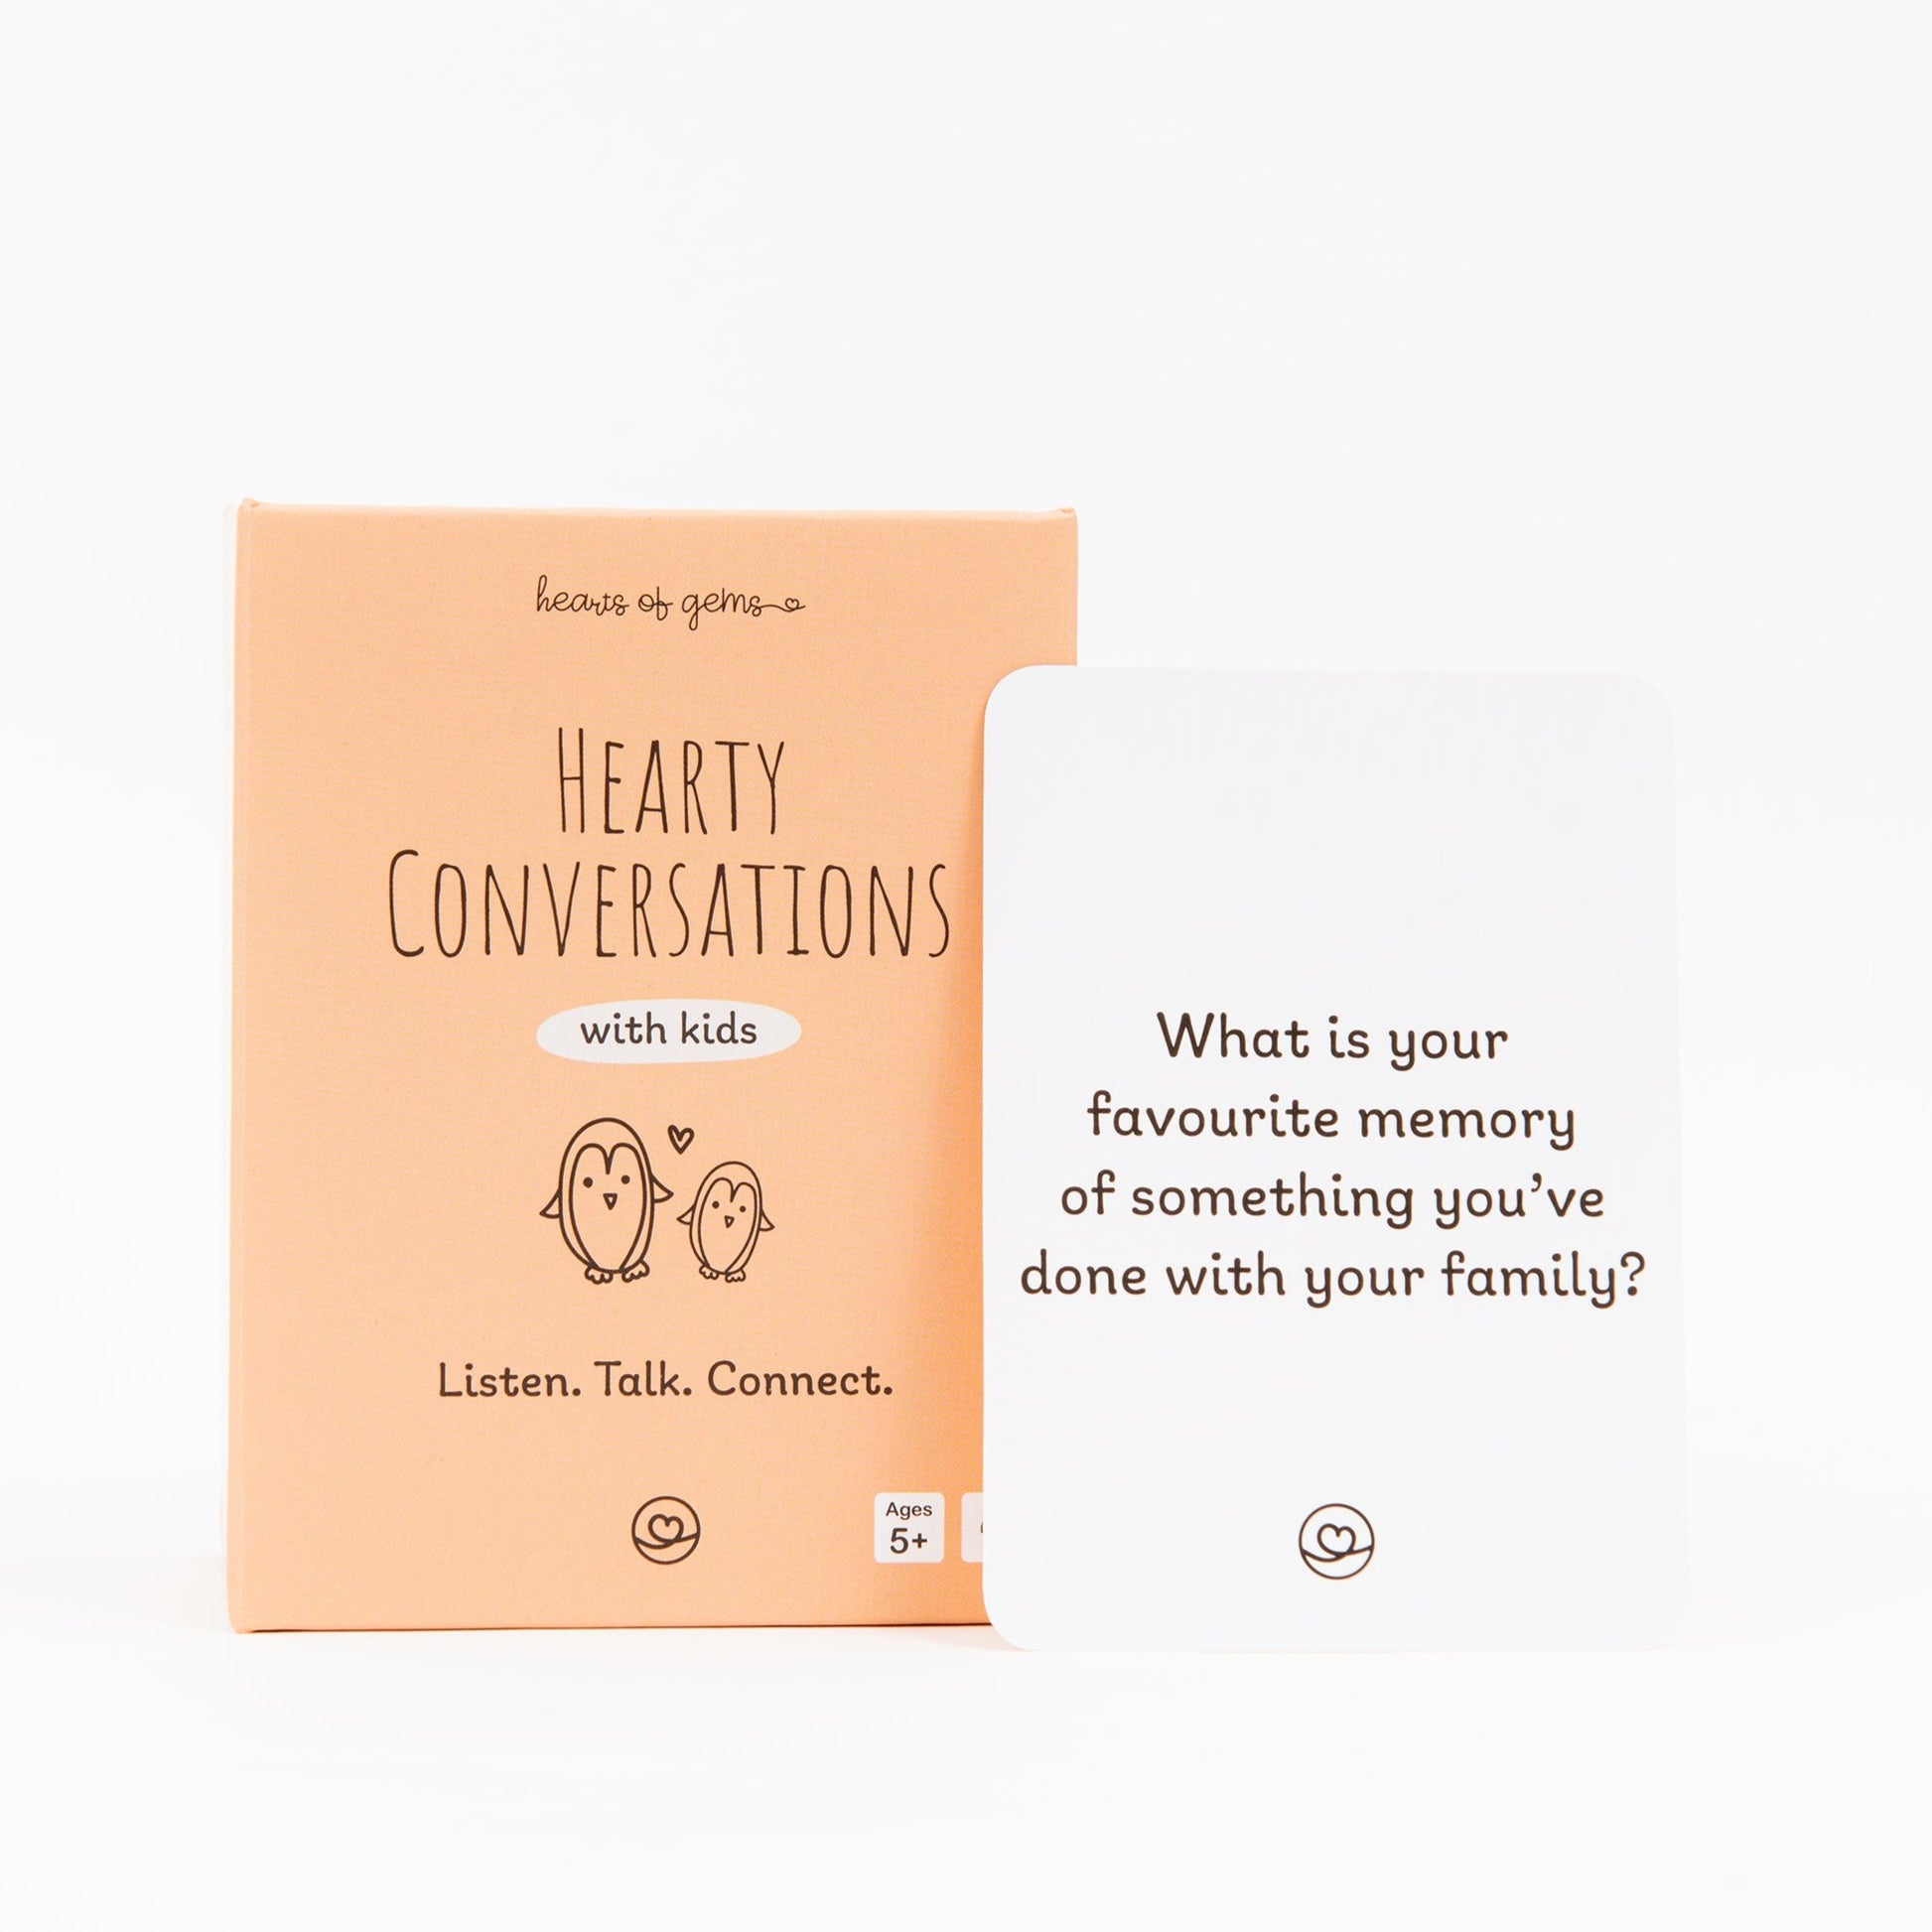 Conversation topics for kids. Conversation cards Family games